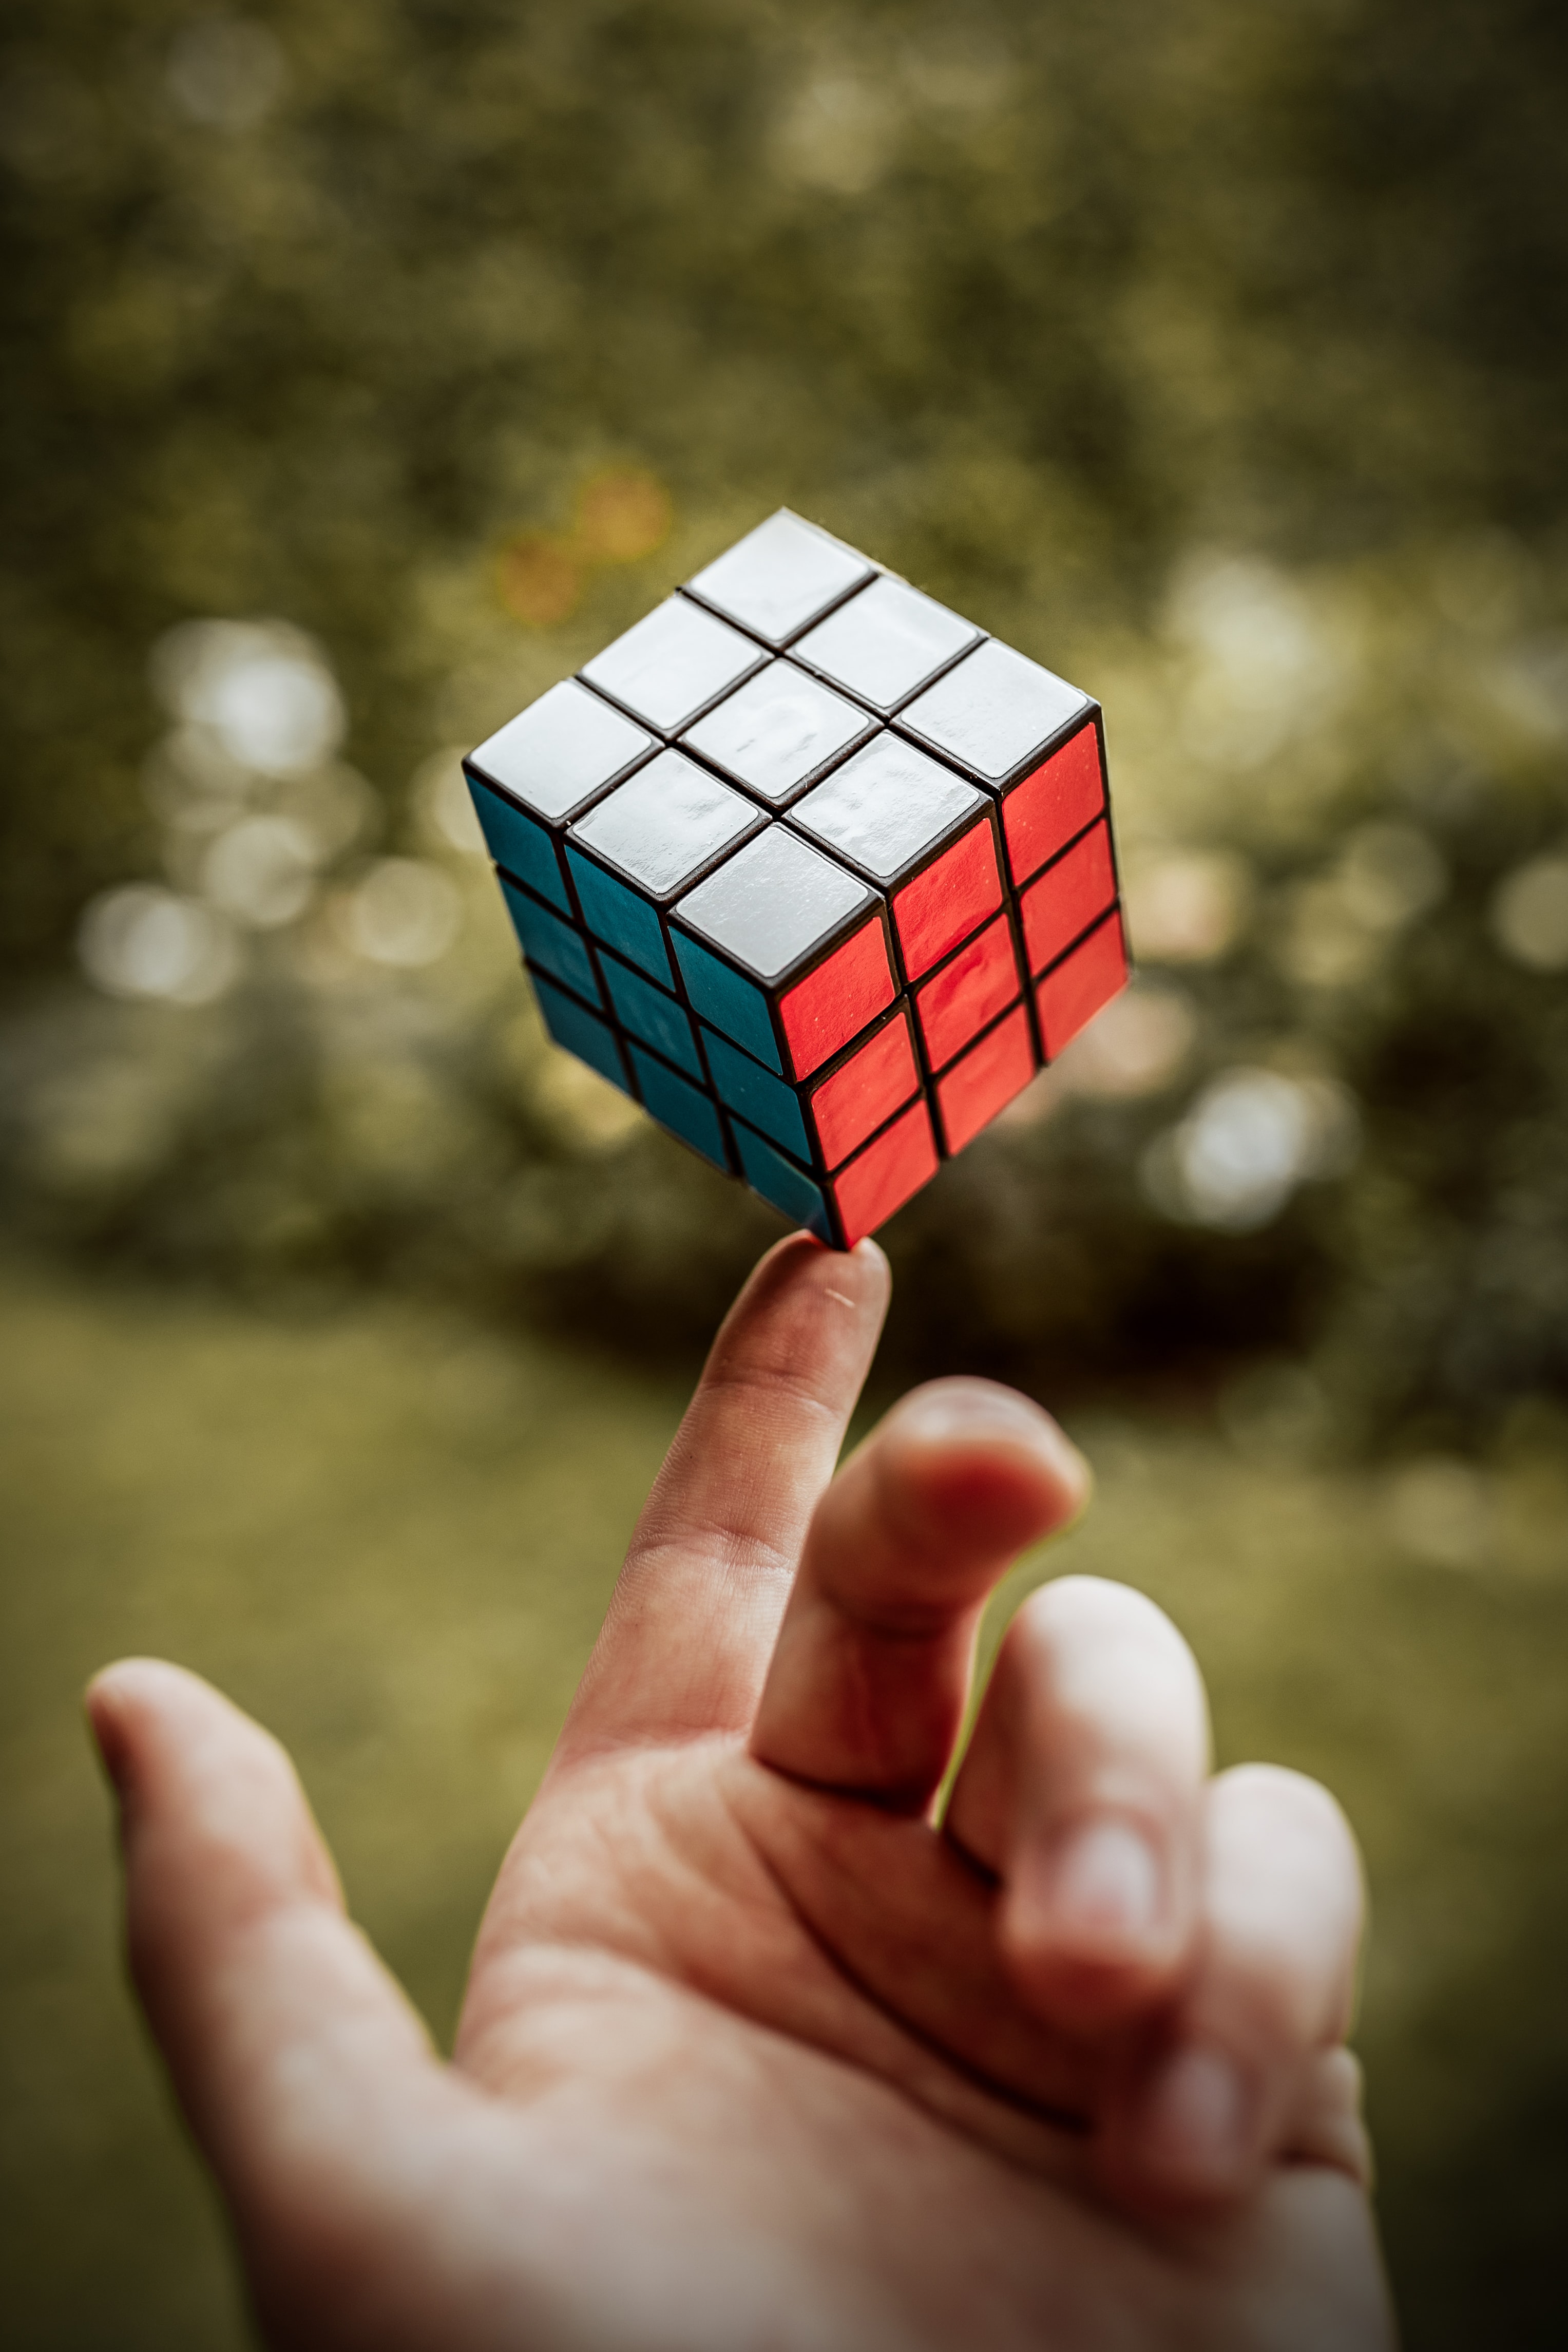 rubik's cube, miscellaneous, hand, miscellanea, fingers, touching, touch